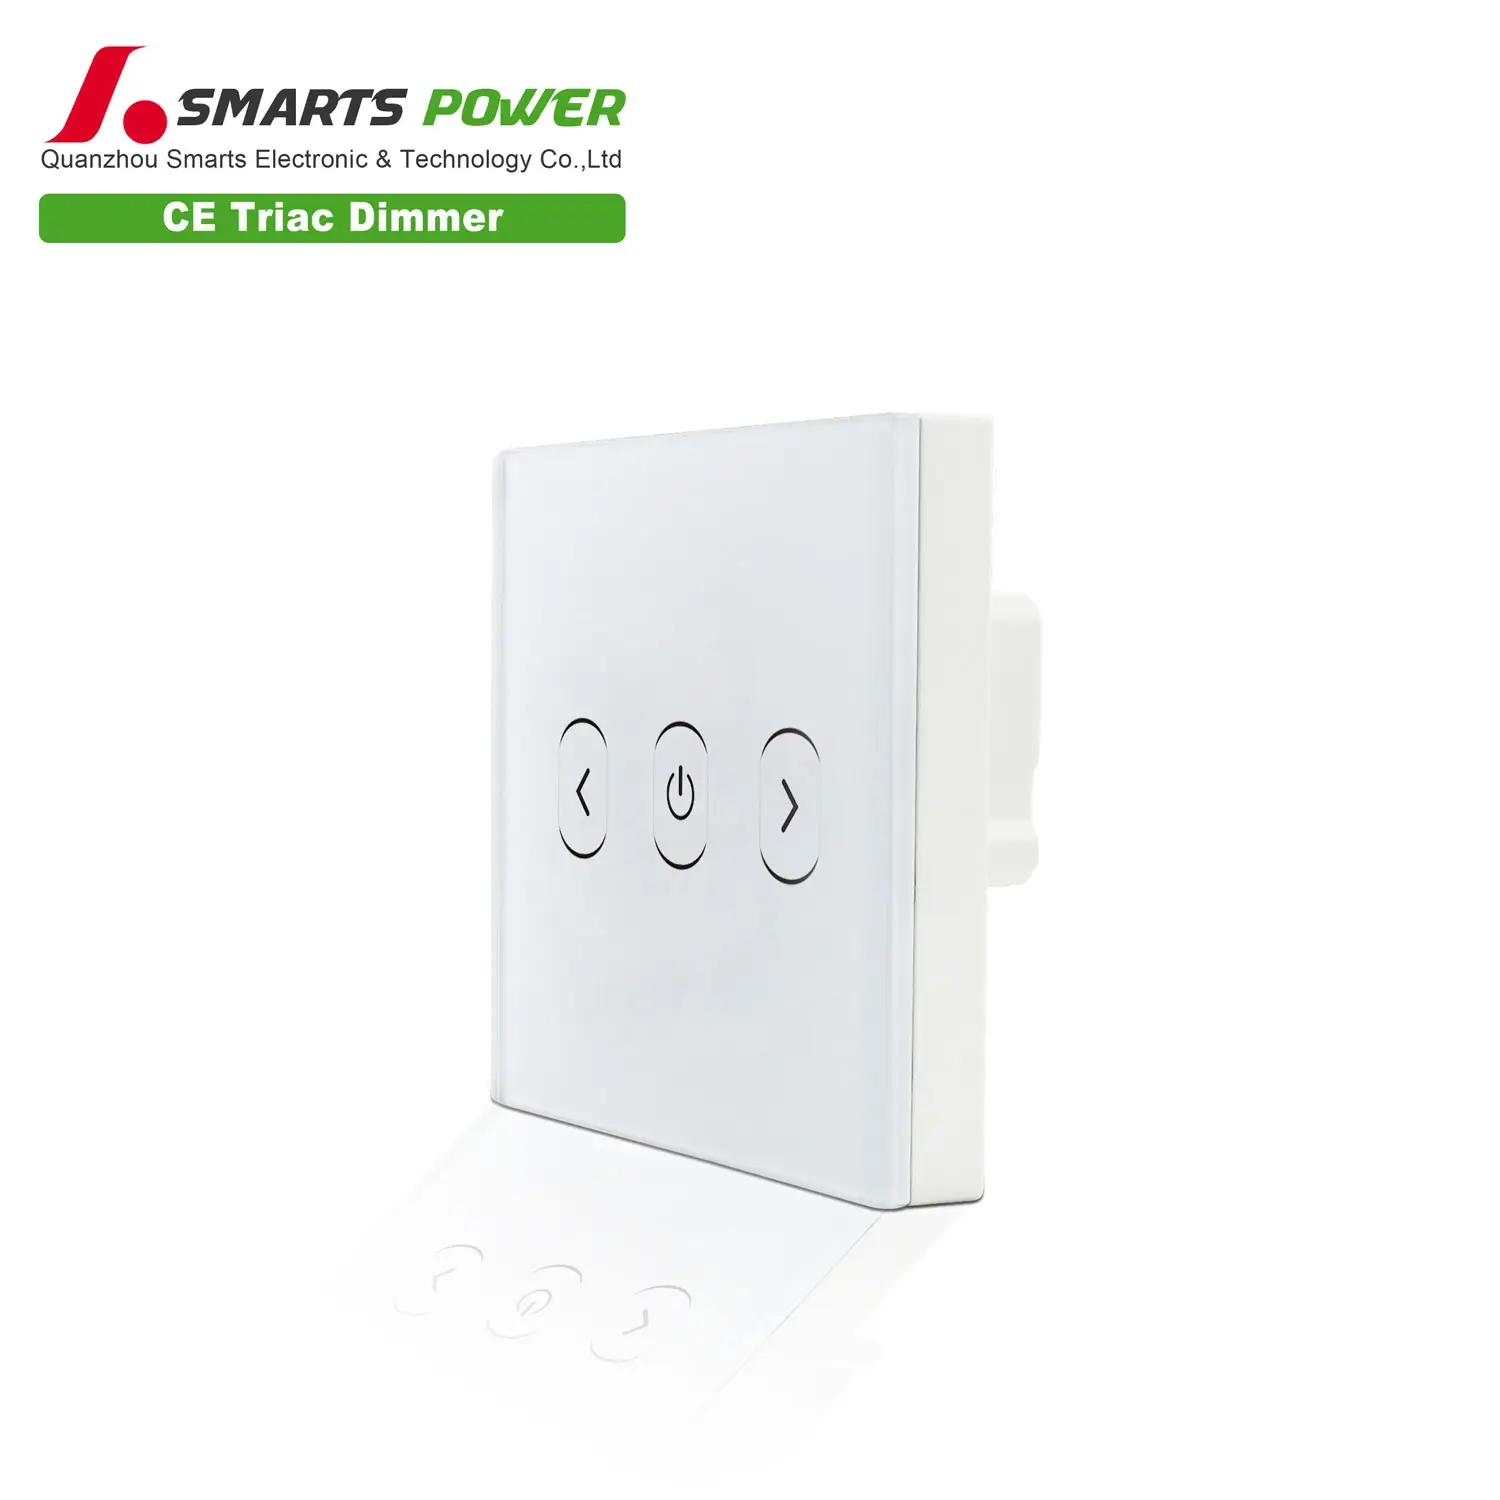 Triac Trailing edge dimmer touch light dimmer switch 230v with three buttons CE manufacturers